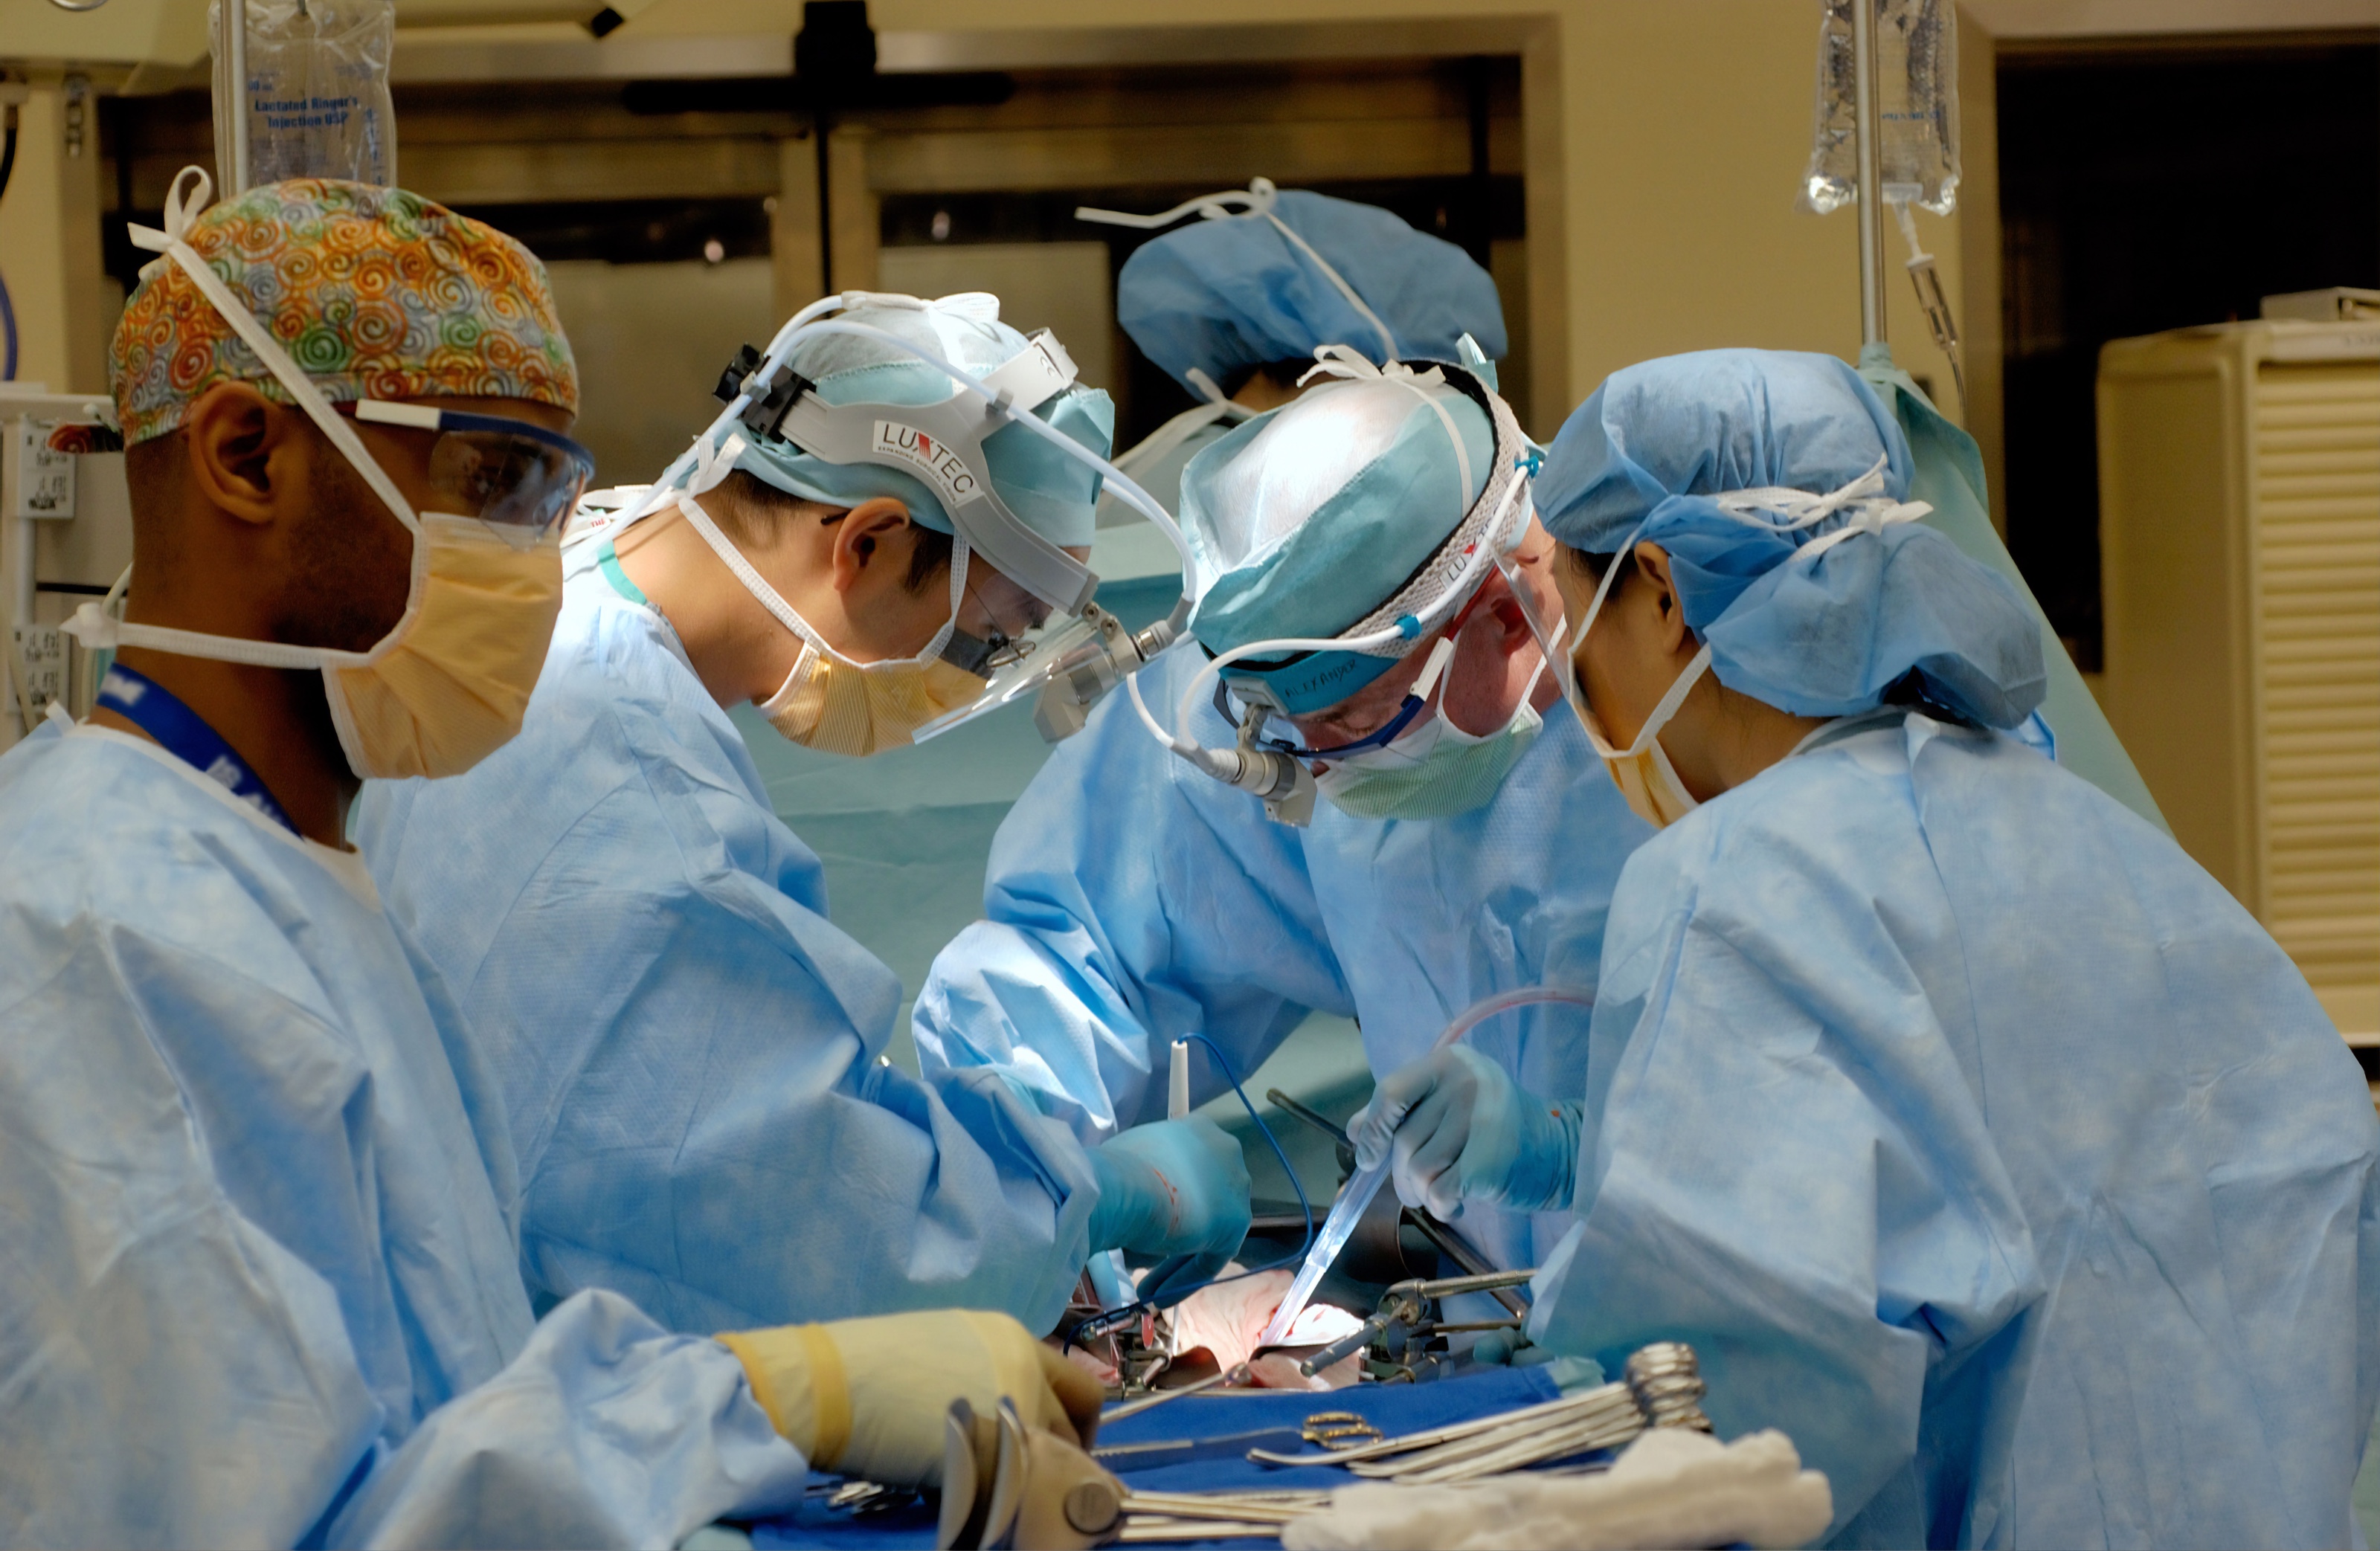 People in scrubs working on a patient.